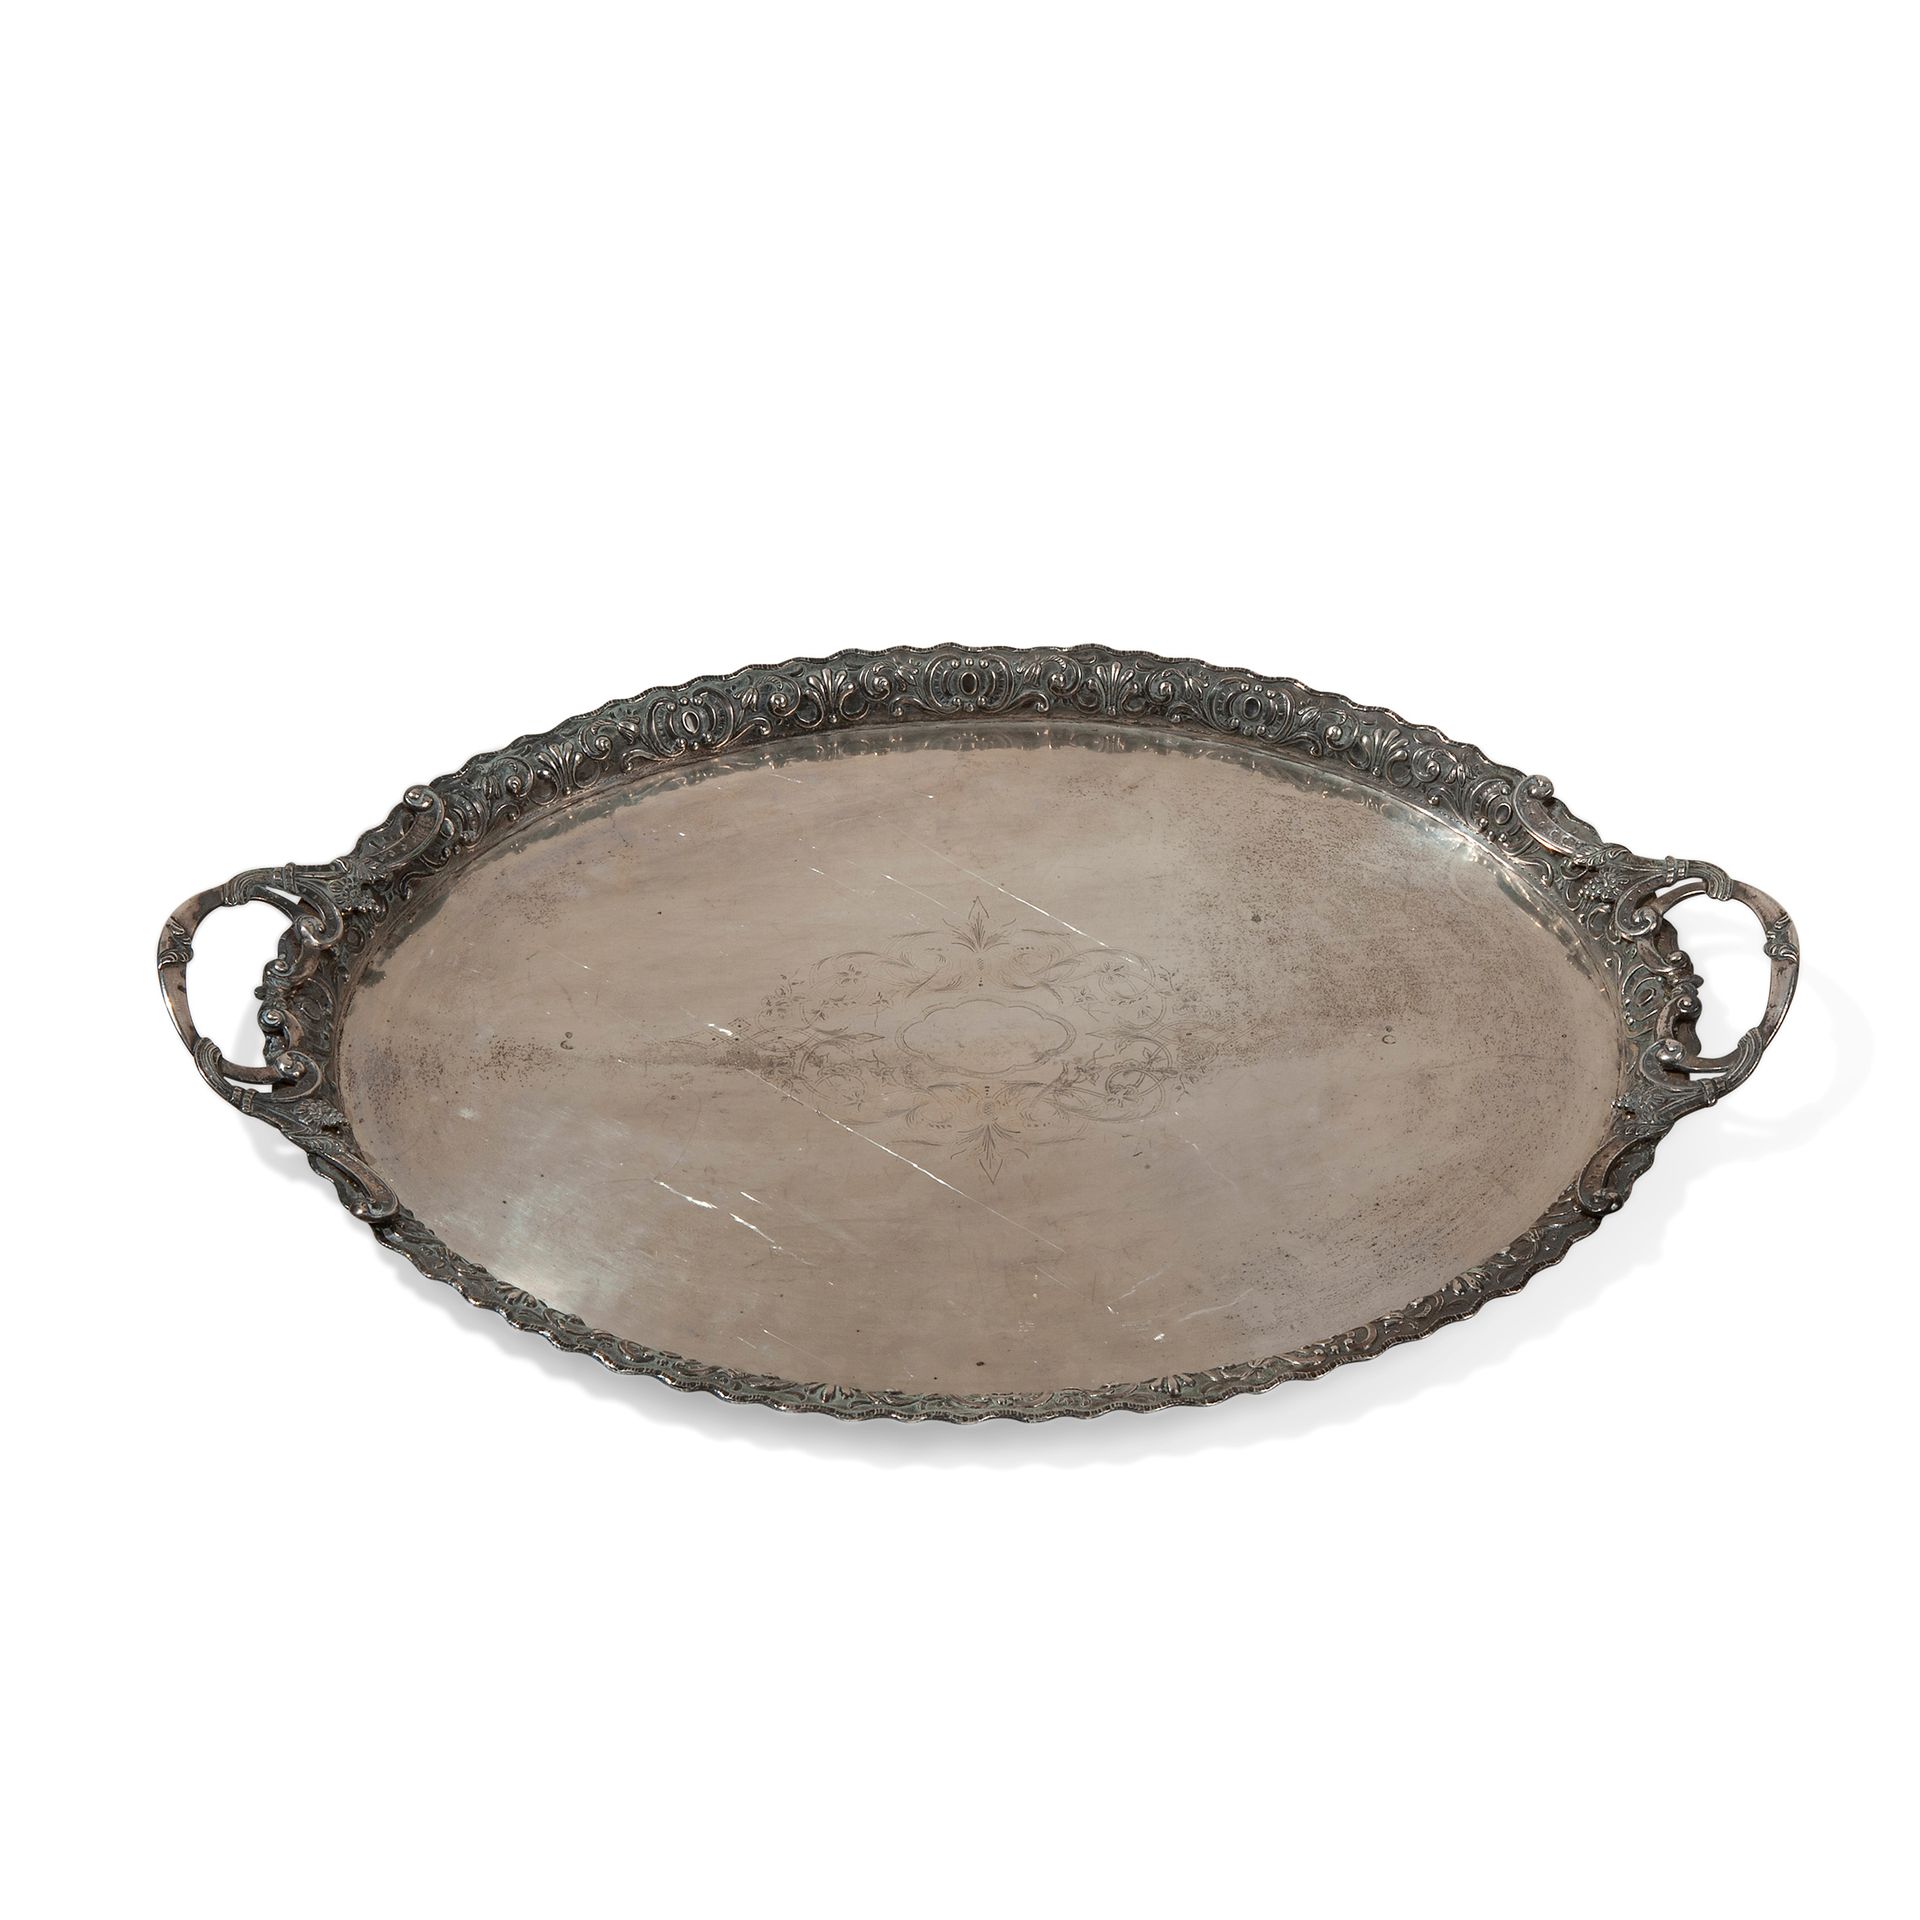 Large silver tray, Middle Eastern manufacture 19th century 椭圆形，边缘完全压印有古典图案 总重量86&hellip;